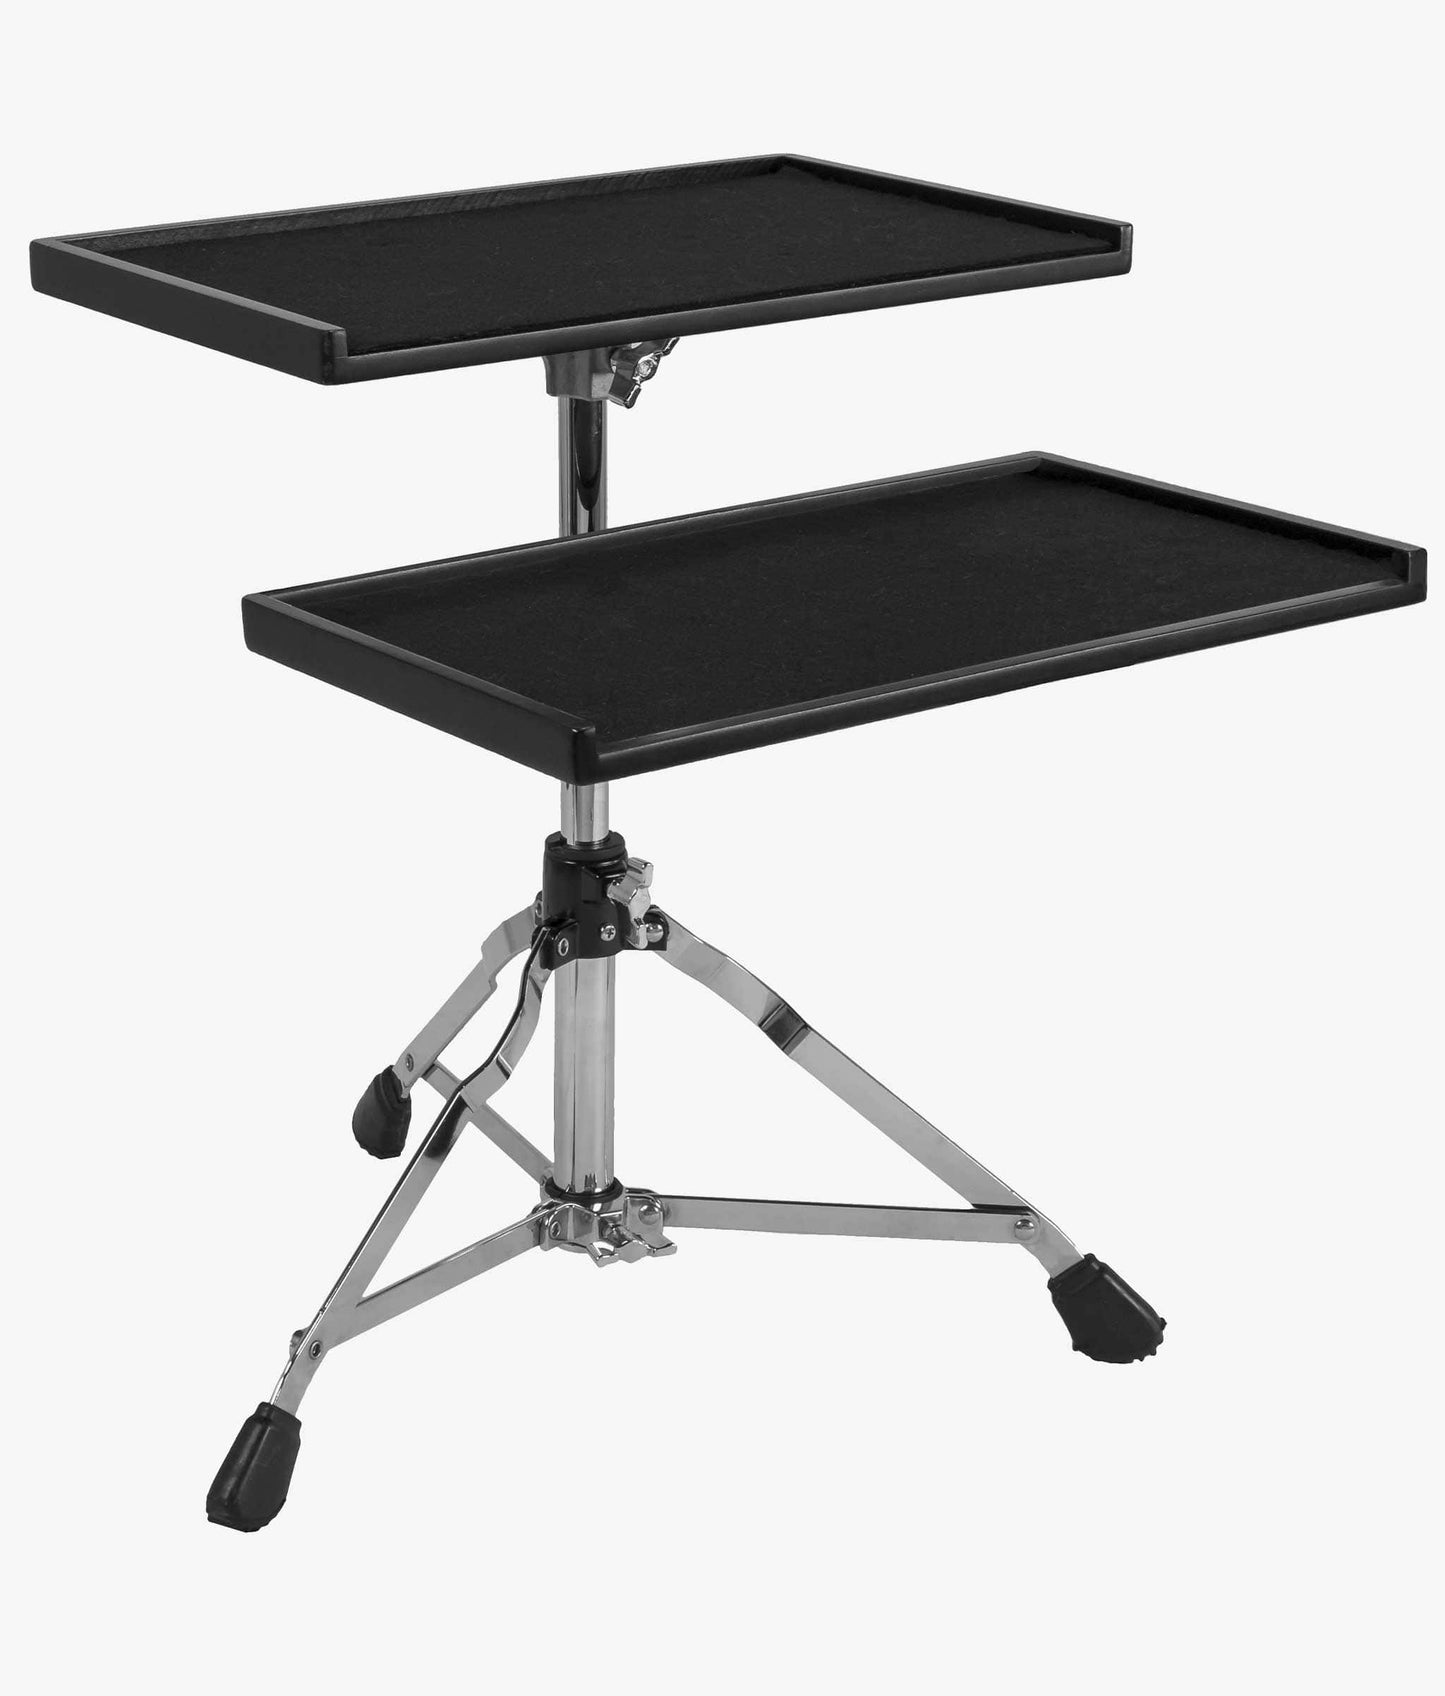  Gibraltar SC-GSE-MNT 16" x 10" Sidekick Essentials Wood Tray with Clamp percussion table